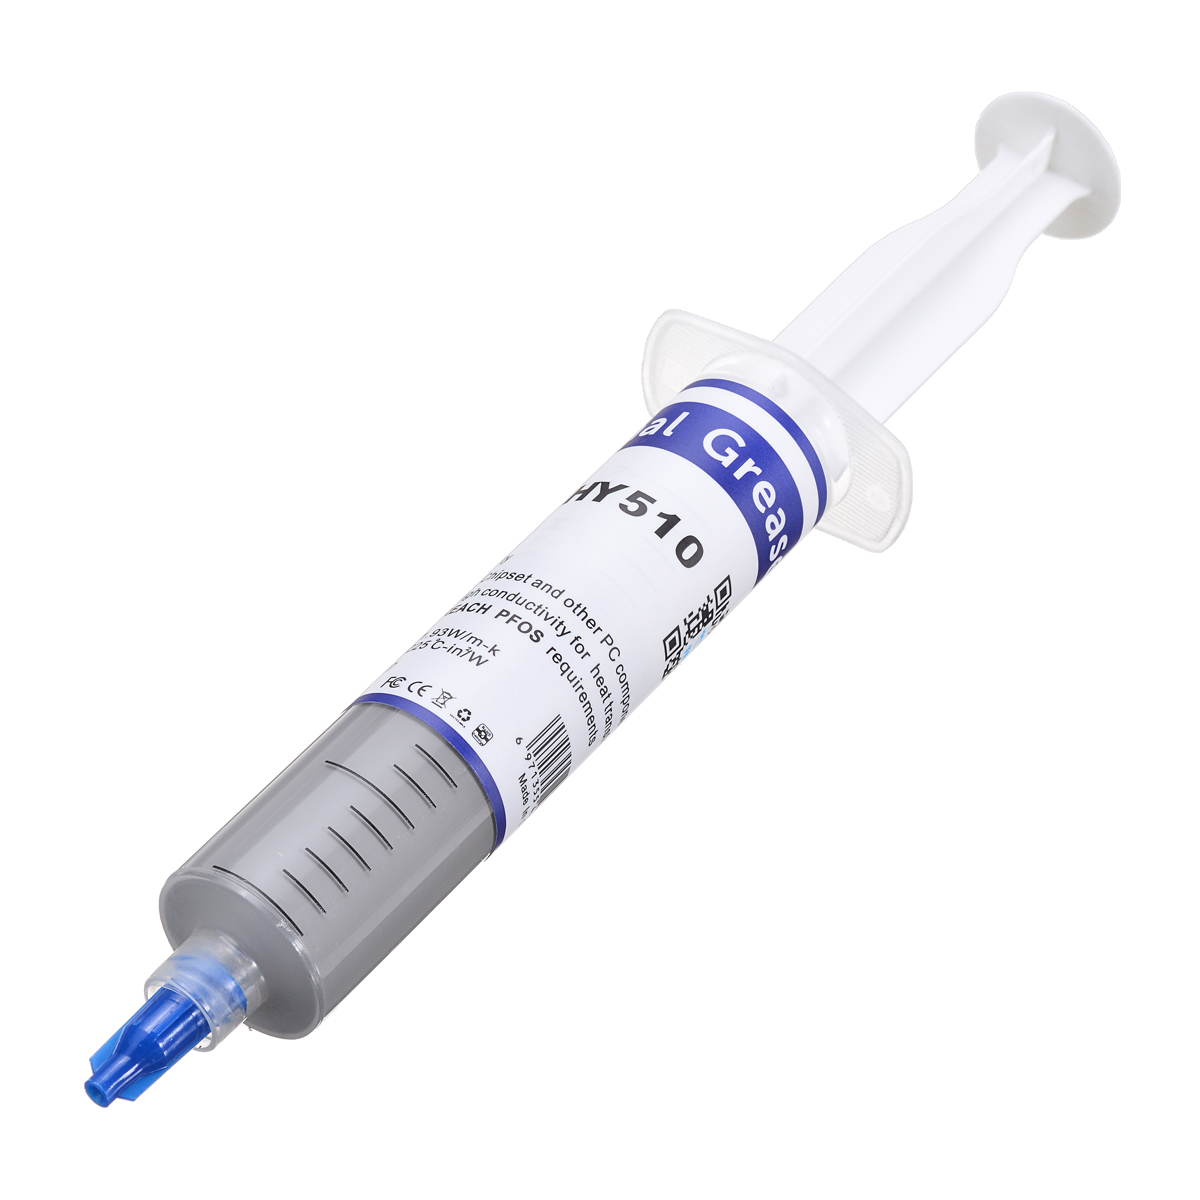 30g HY-510 Grey Thermal Silicone Grease Syringe Paste For LED CPU GPU Household Appliances Electronic Components Cooling